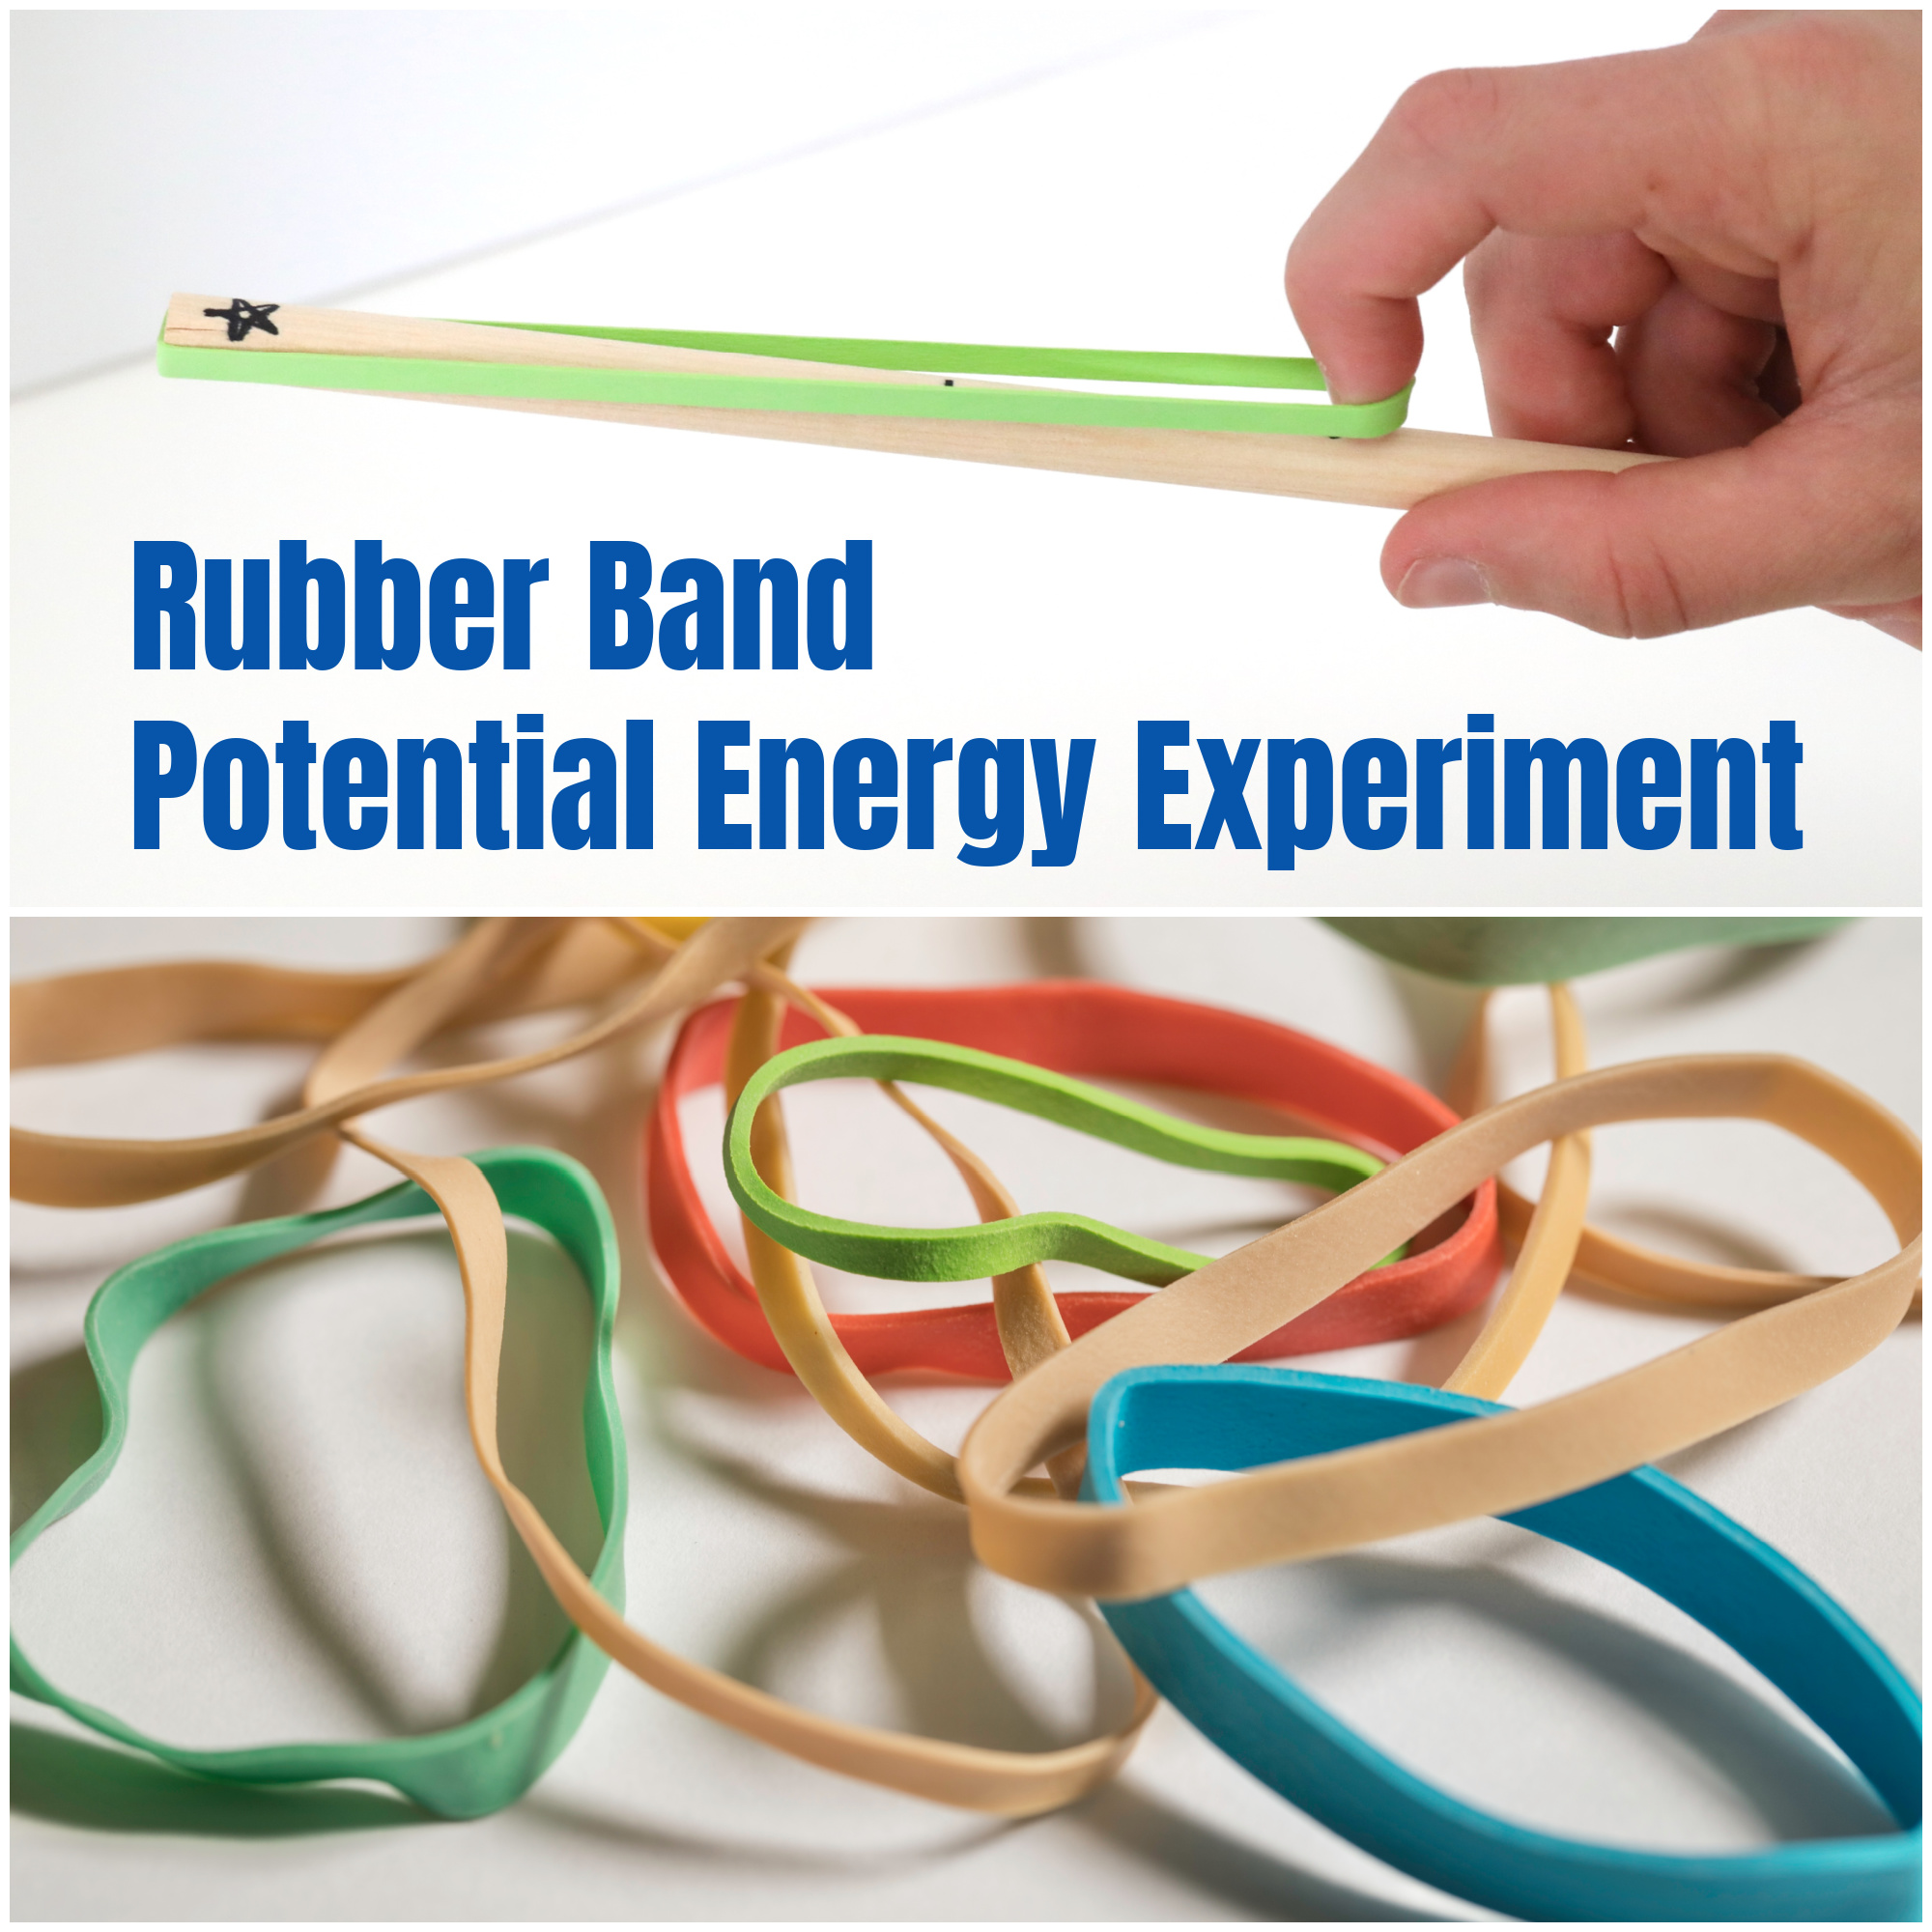 Potential energy science experiment with rubber bands